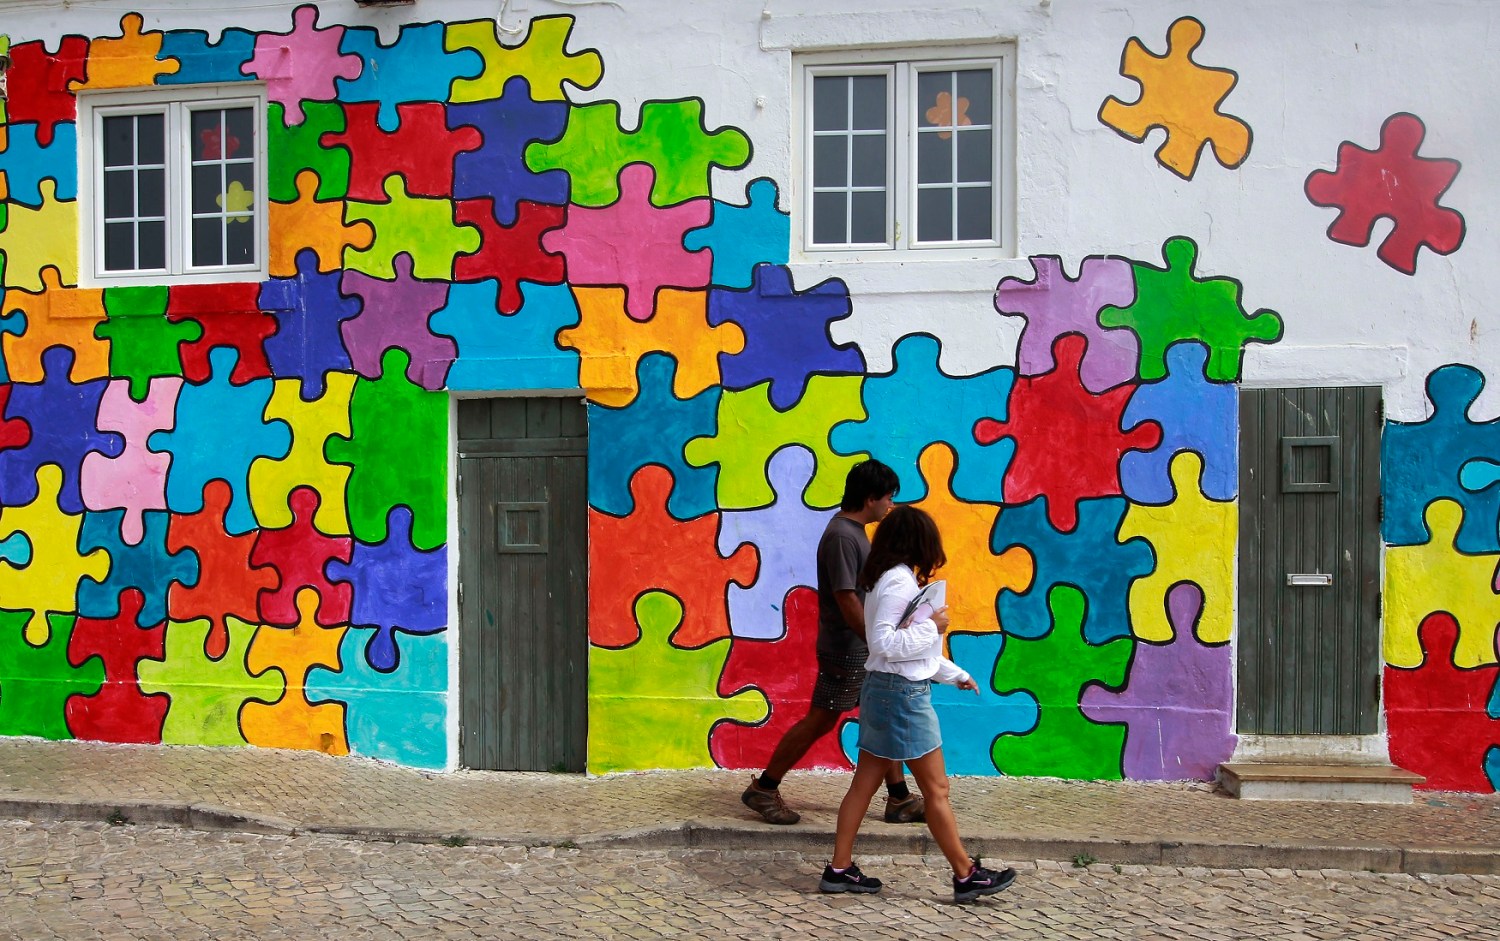 People walk past a house painted in a puzzle pattern in Eiriceira village North of Lisbon August 13, 2011. Portugal still faces some tough challenges but is on track to meet this year's budget deficit goal despite a shortfall in performance so far, officials from the European Union and IMF said on Friday. REUTERS/Jose Manuel Ribeiro (PORTUGAL - Tags: POLITICS BUSINESS)